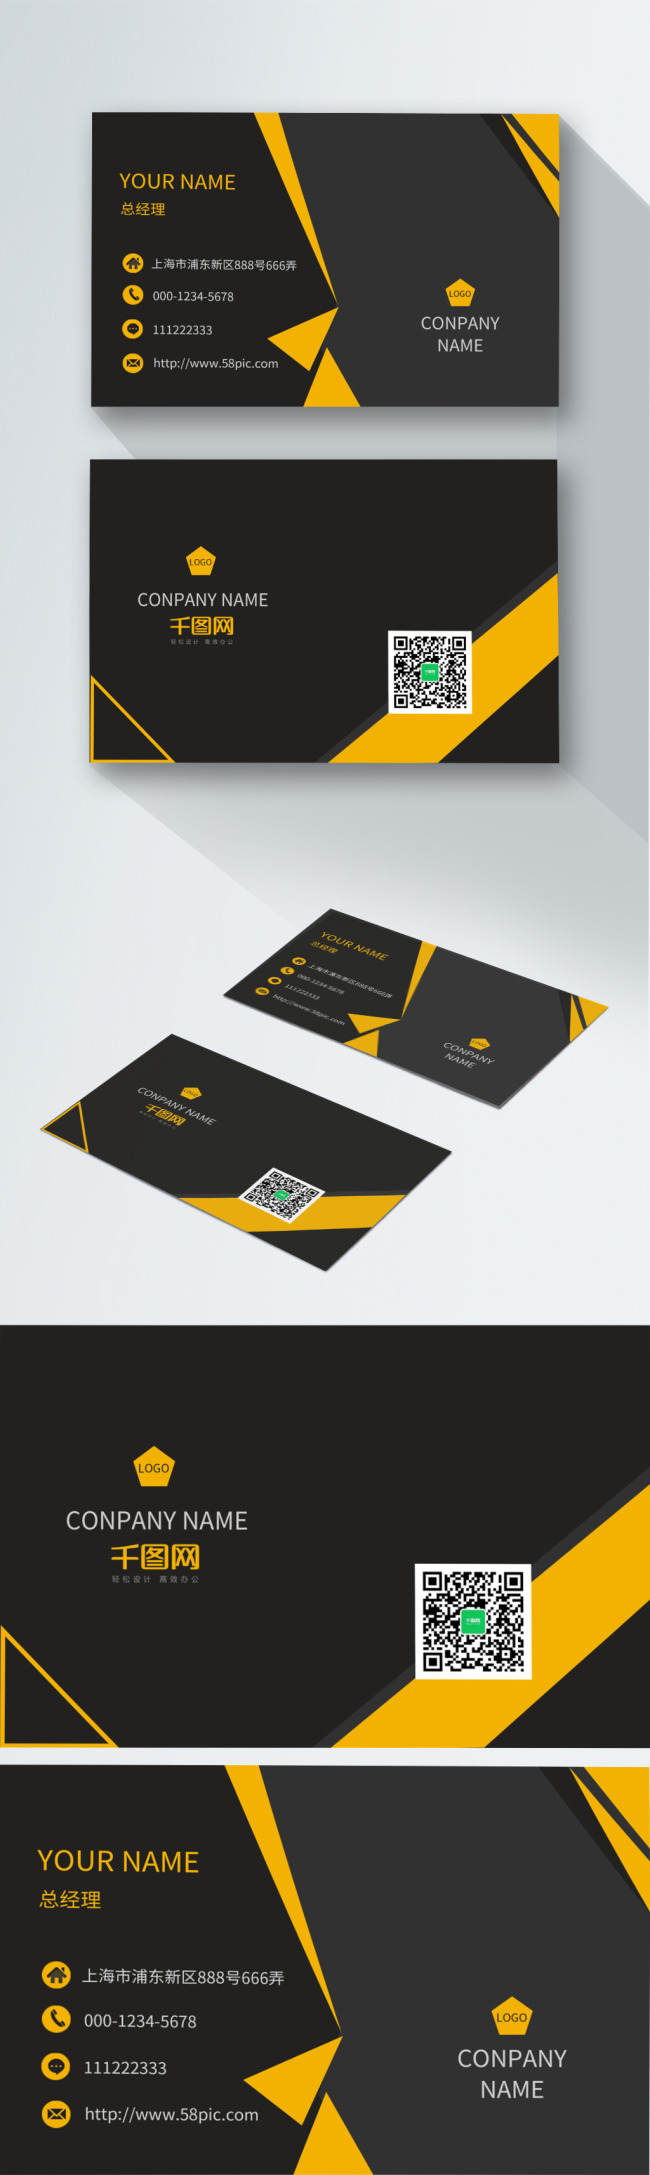 Download Yellow Business Card Template Image Picture Free Download 450006661 Lovepik Com Yellowimages Mockups